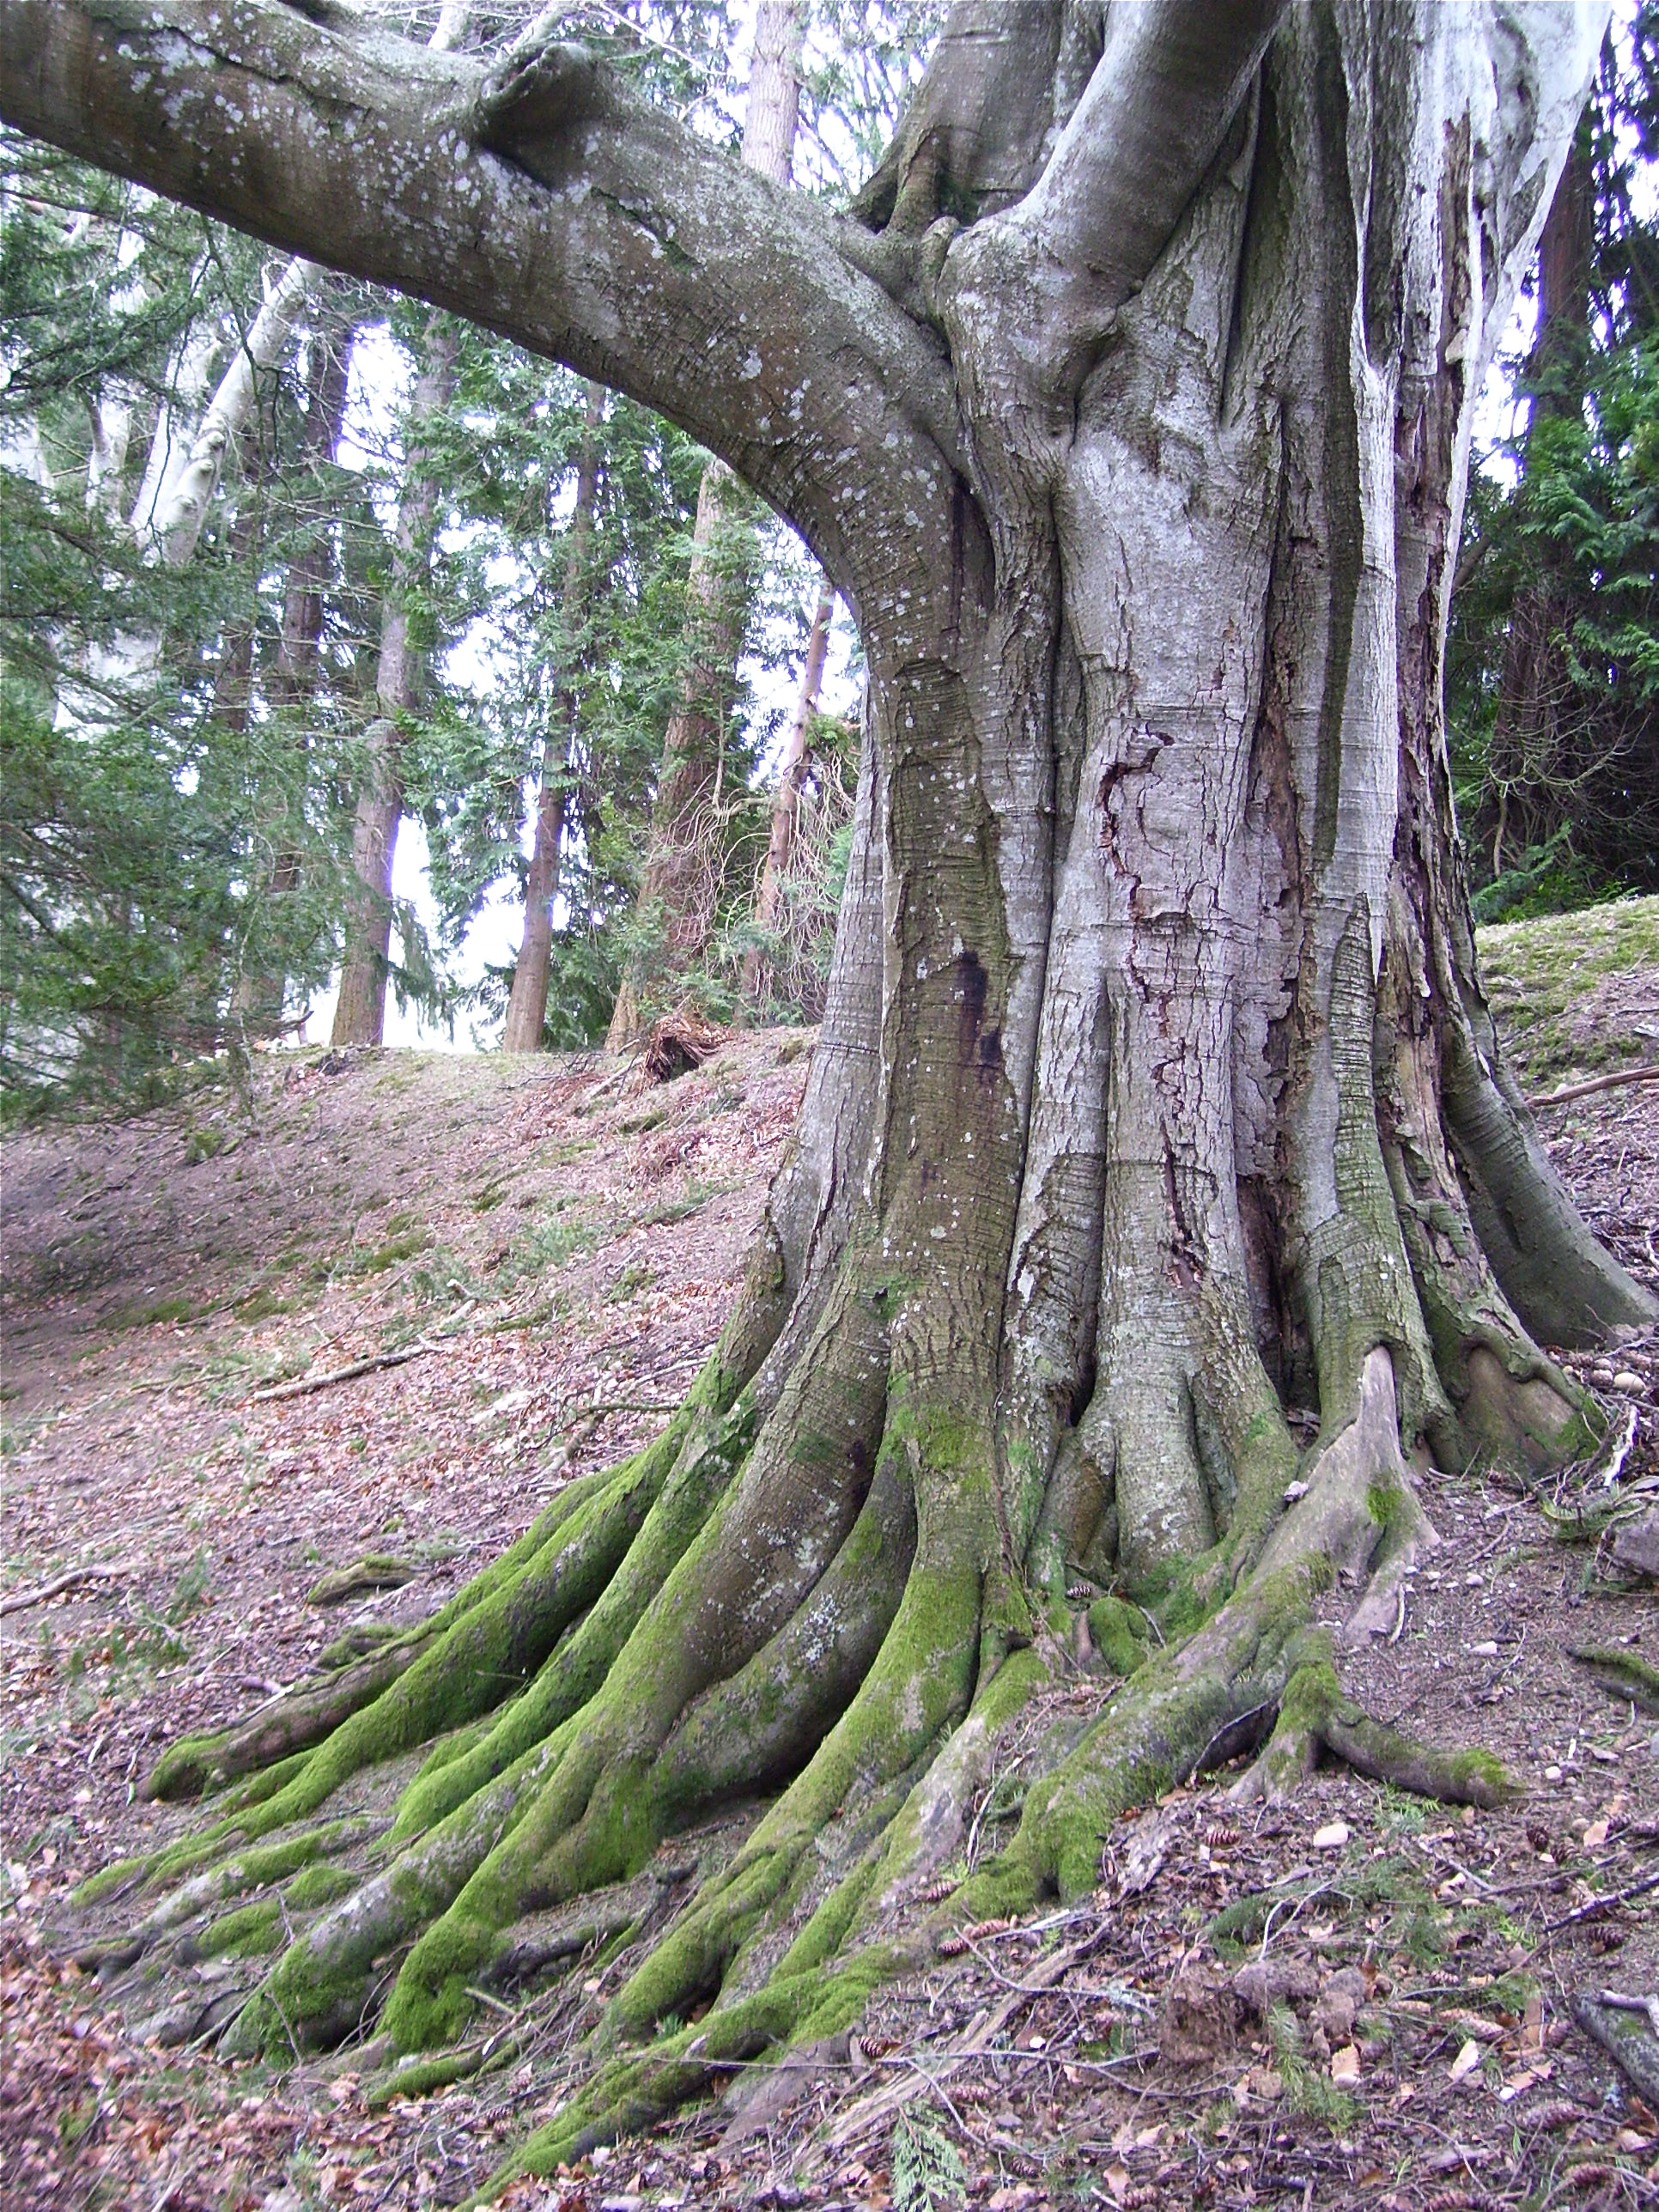 The Tuesday tree: the serpent-rooted beech | Dancing Beastie